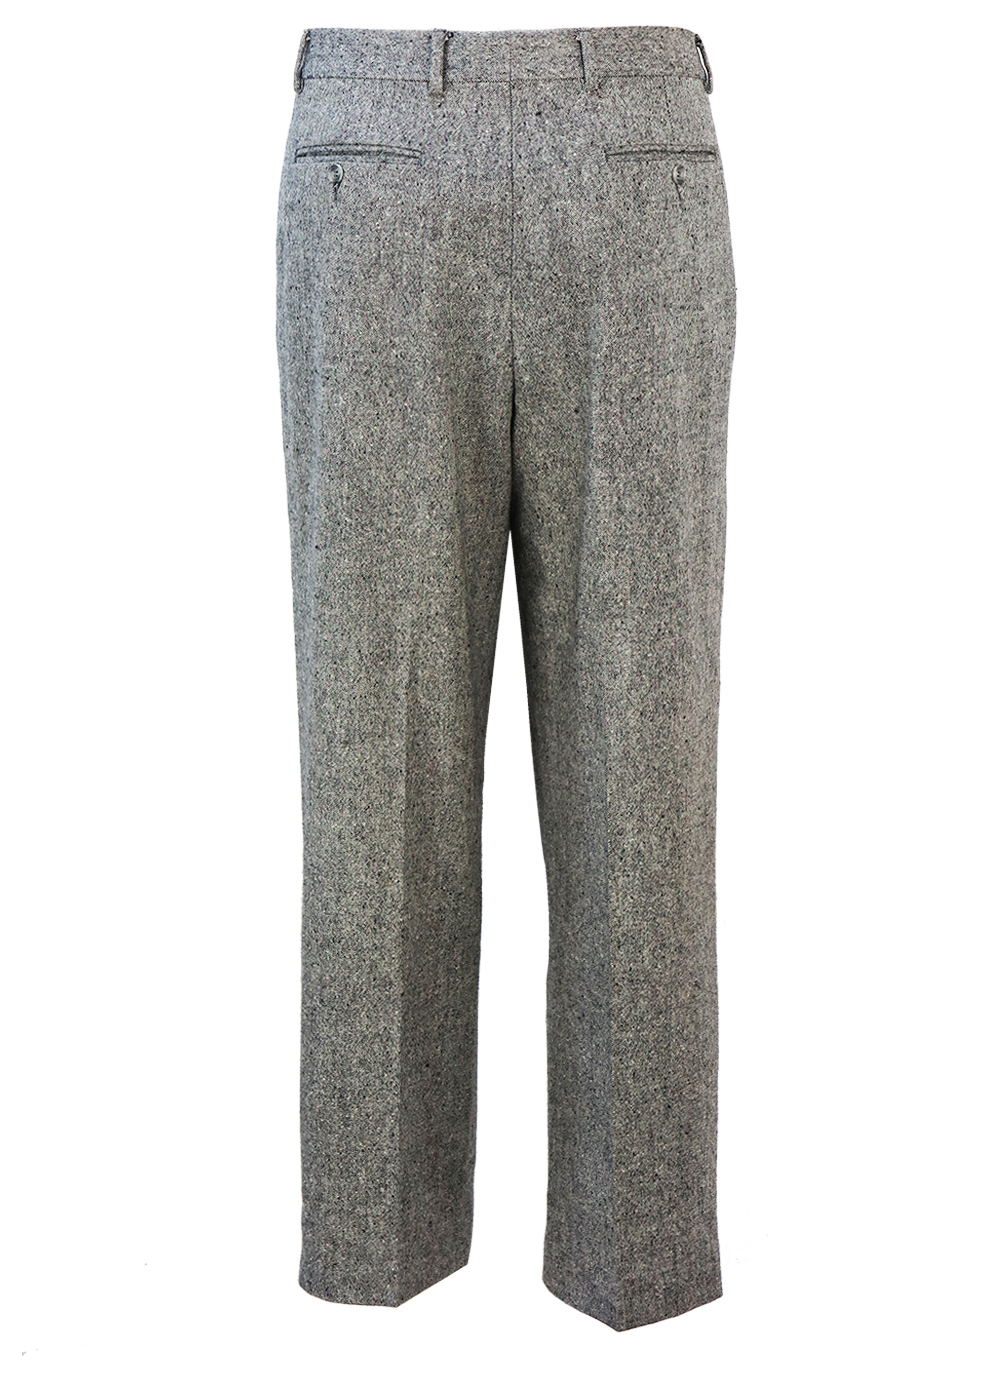 Pleat Front, Wool Tailored Trousers with Light Grey, Black & White ...